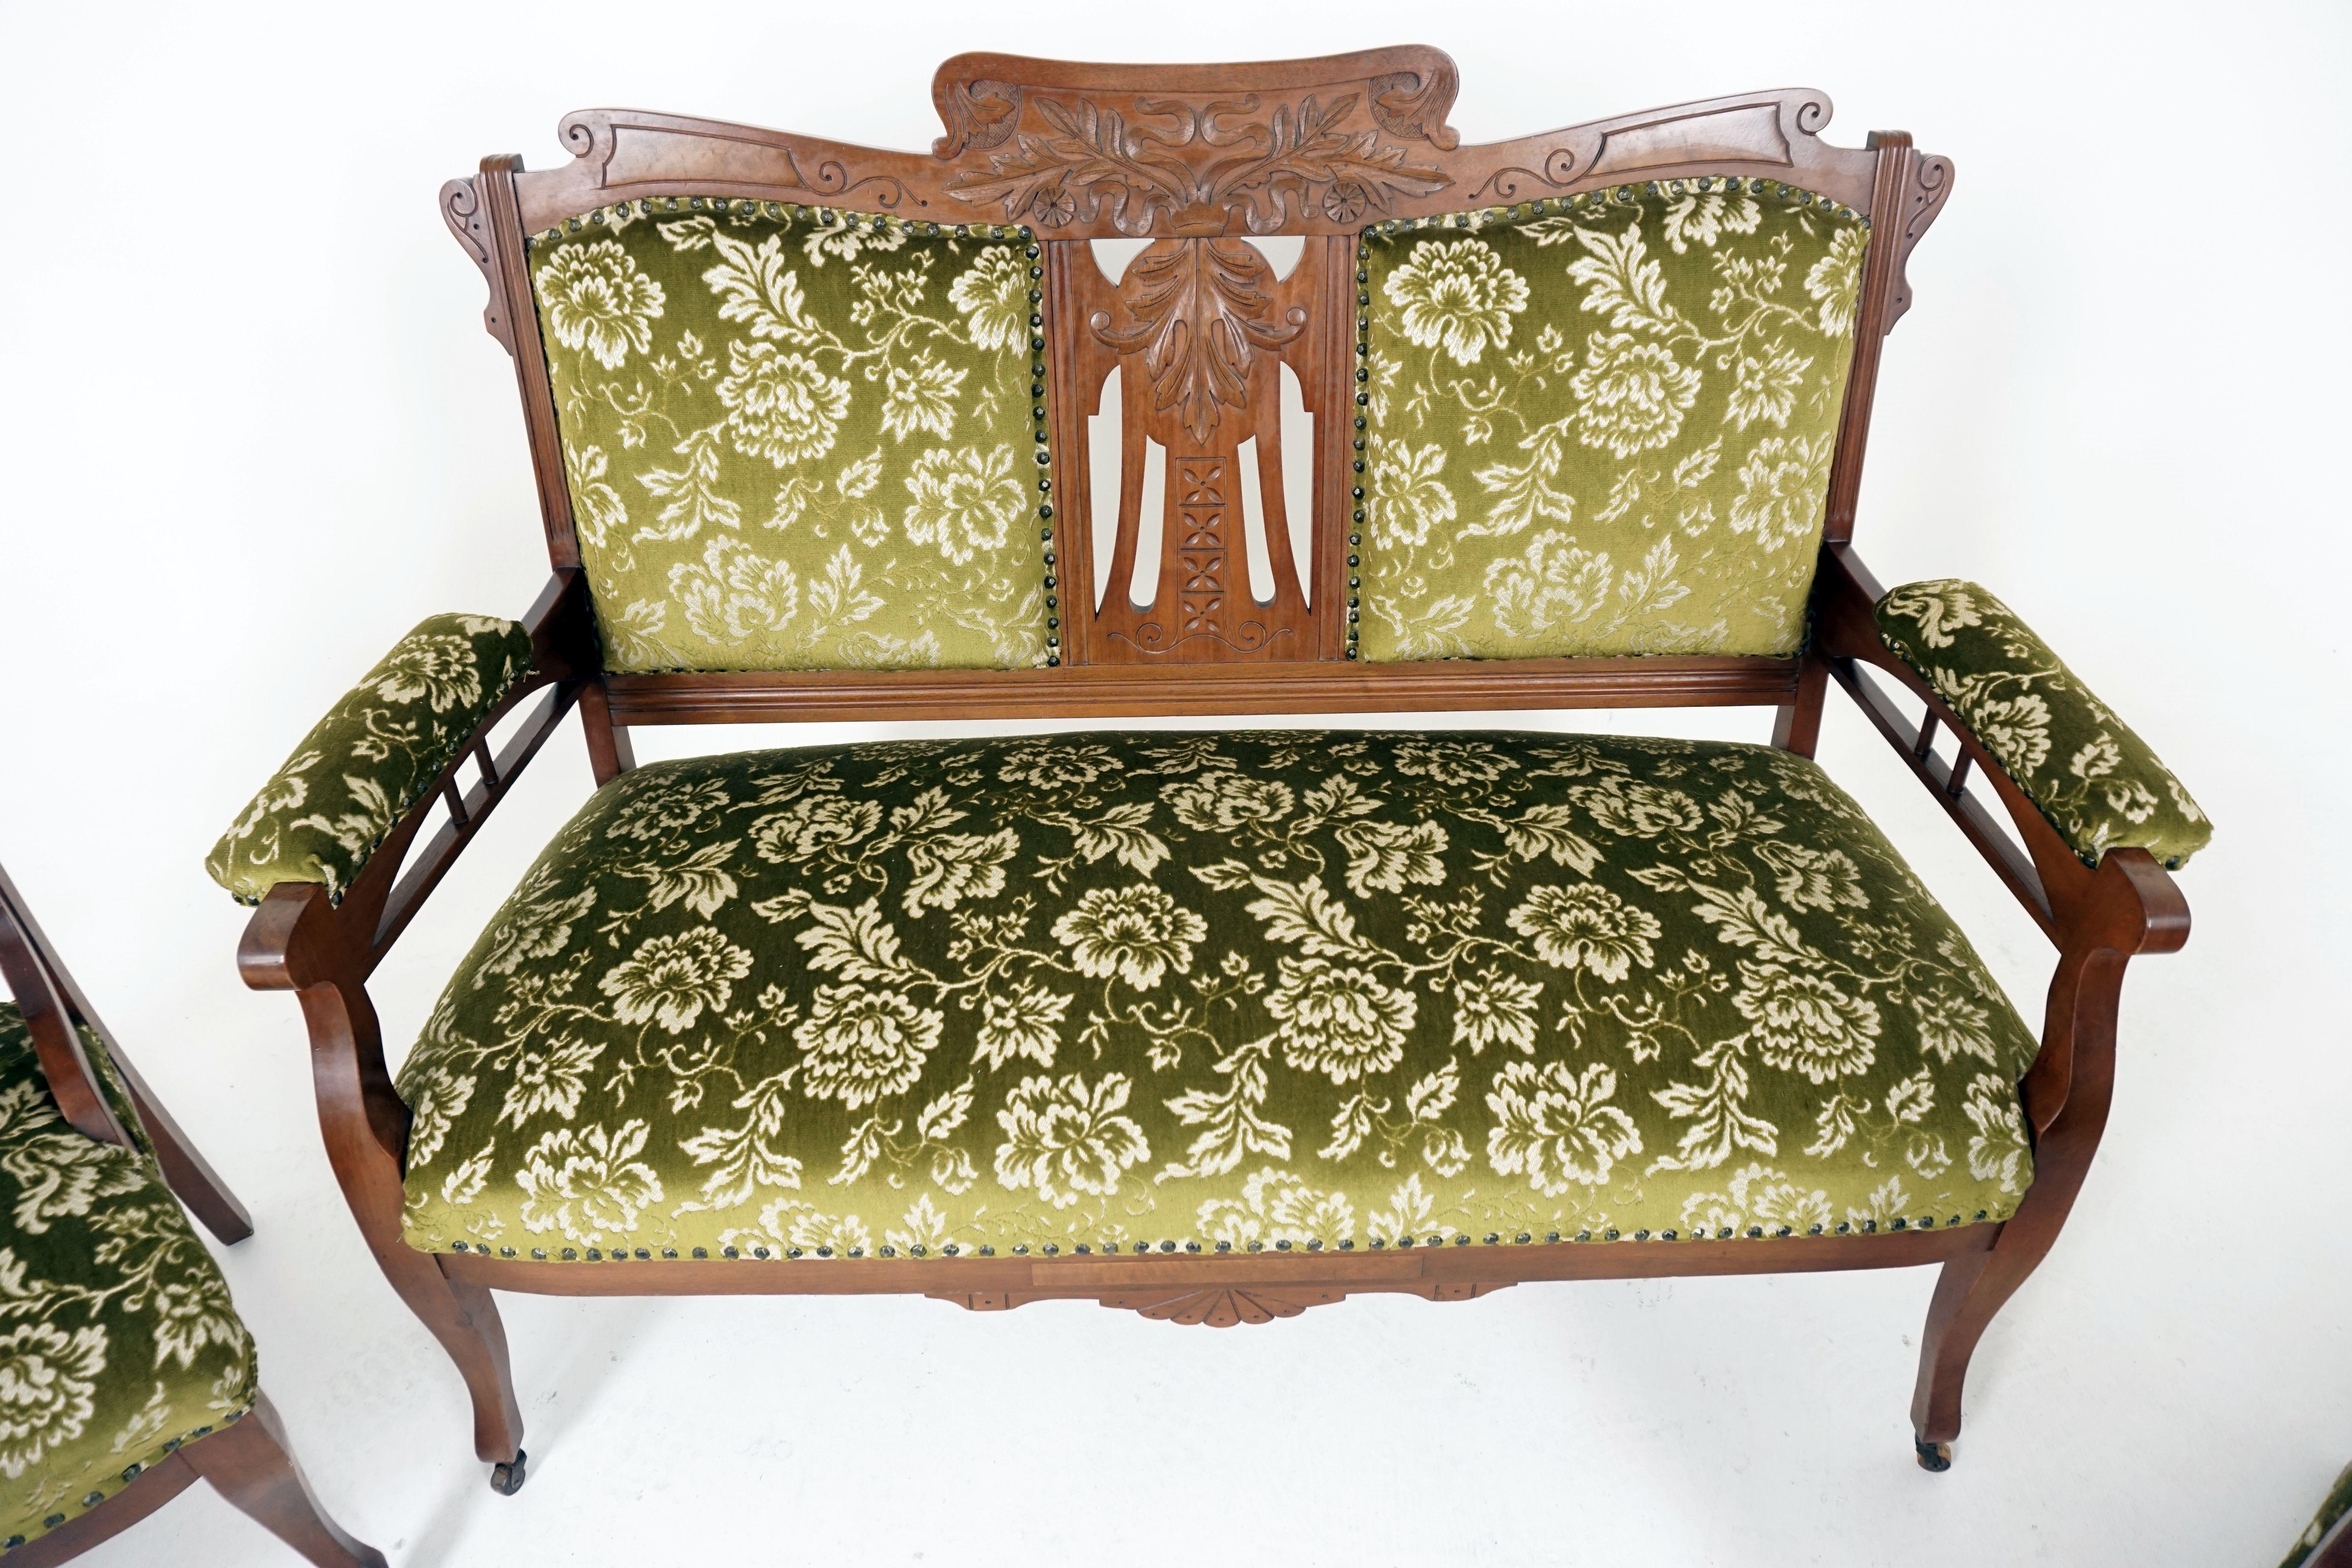 Antique sofa suite, Victorian Art Nouveau walnut three piece parlor suite, antique furniture, America 1900, B2019

America, 1900
Solid walnut
Consists of the two-seat settee, armchair, and single chair
Settee with Art Nouveau gallery on